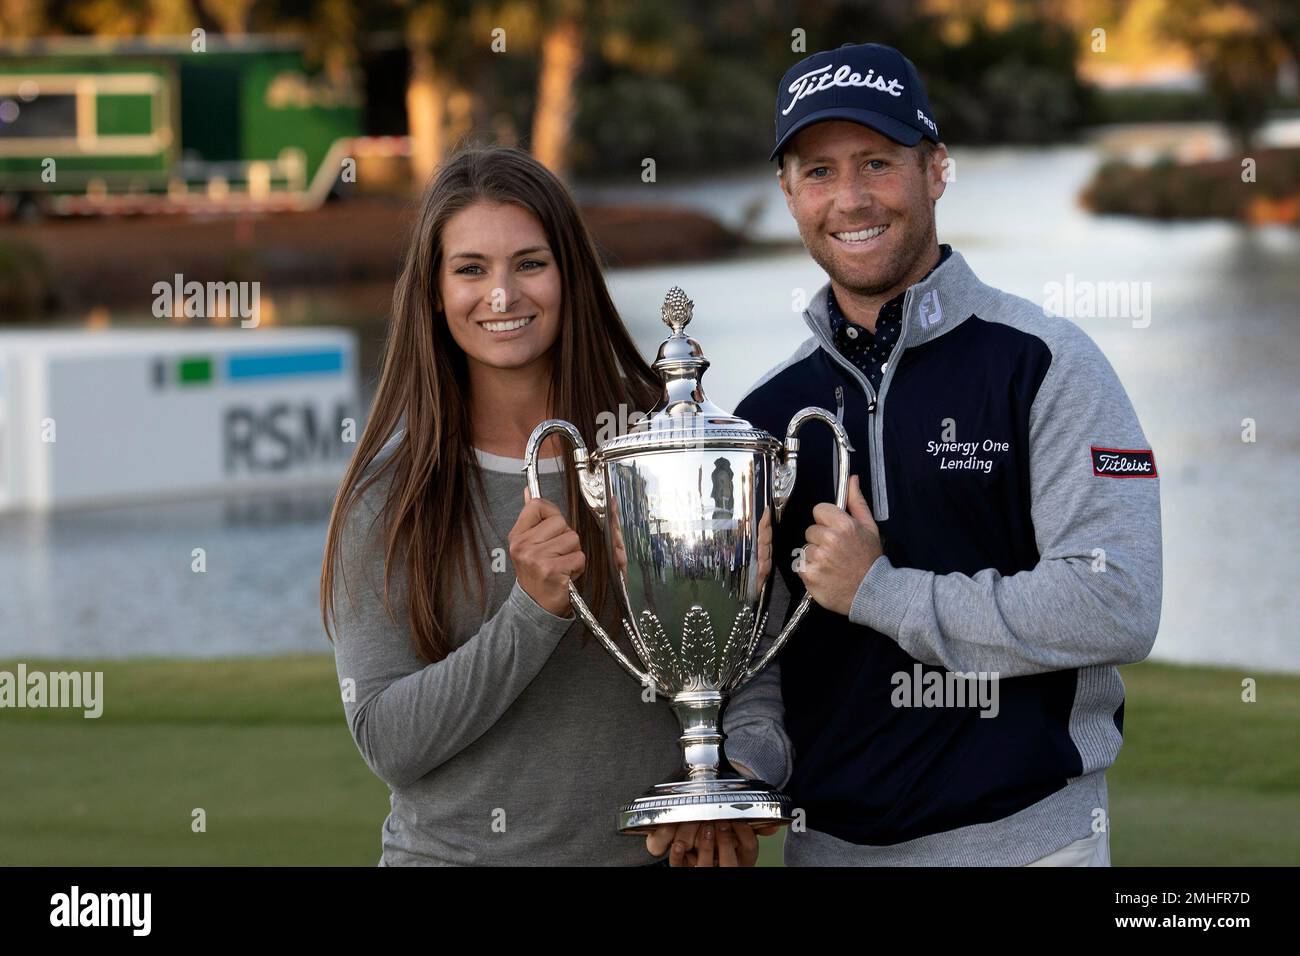 Tyler Duncan and his wife Maria Duncan hold the winning trophy after a second hole playoff during the final round of the RSM Classic golf tournament in St